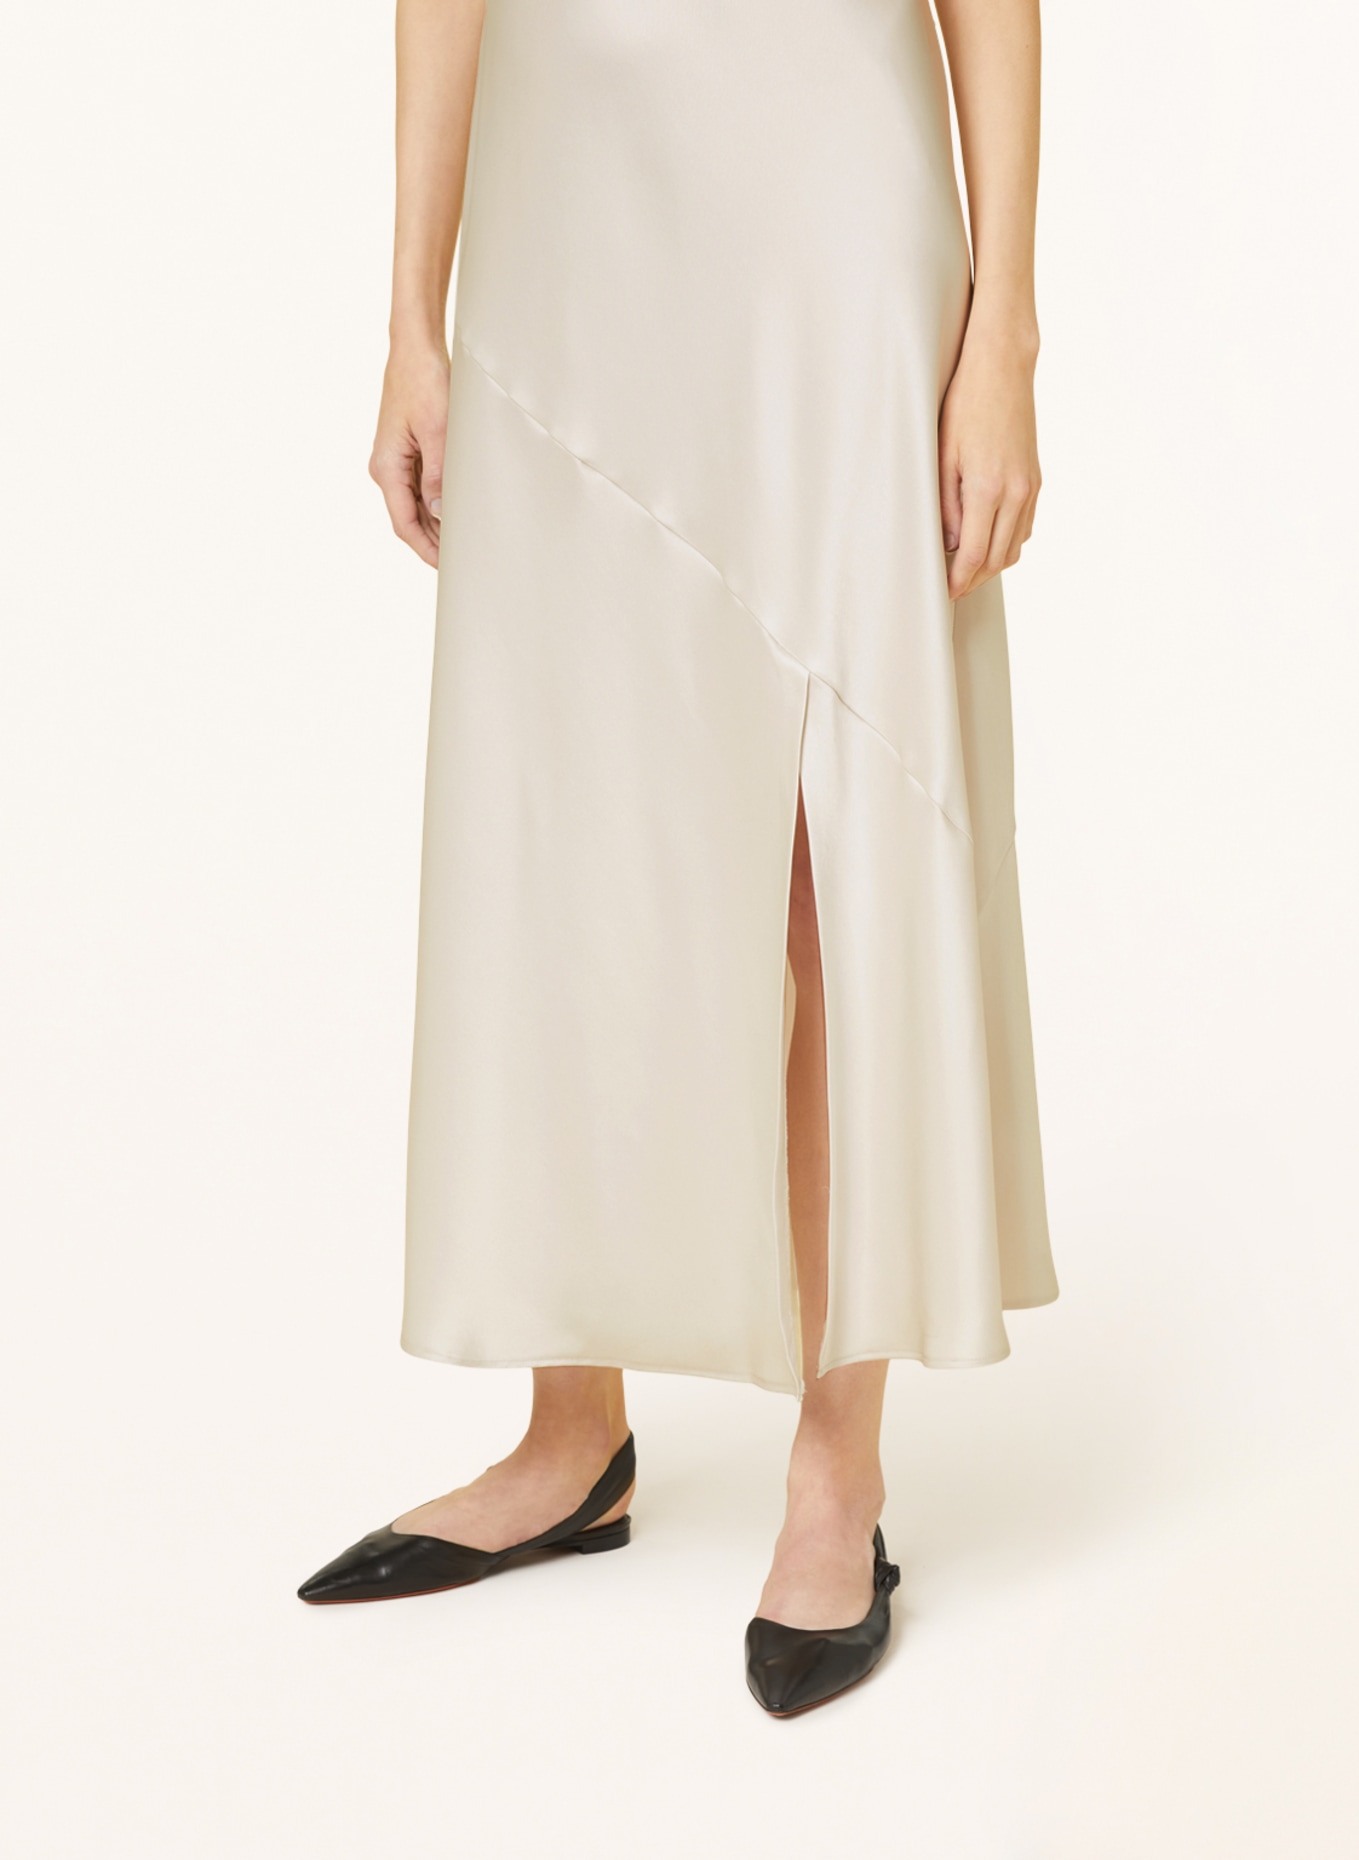 MARC CAIN Evening dress in satin, Color: 182 smoke (Image 5)